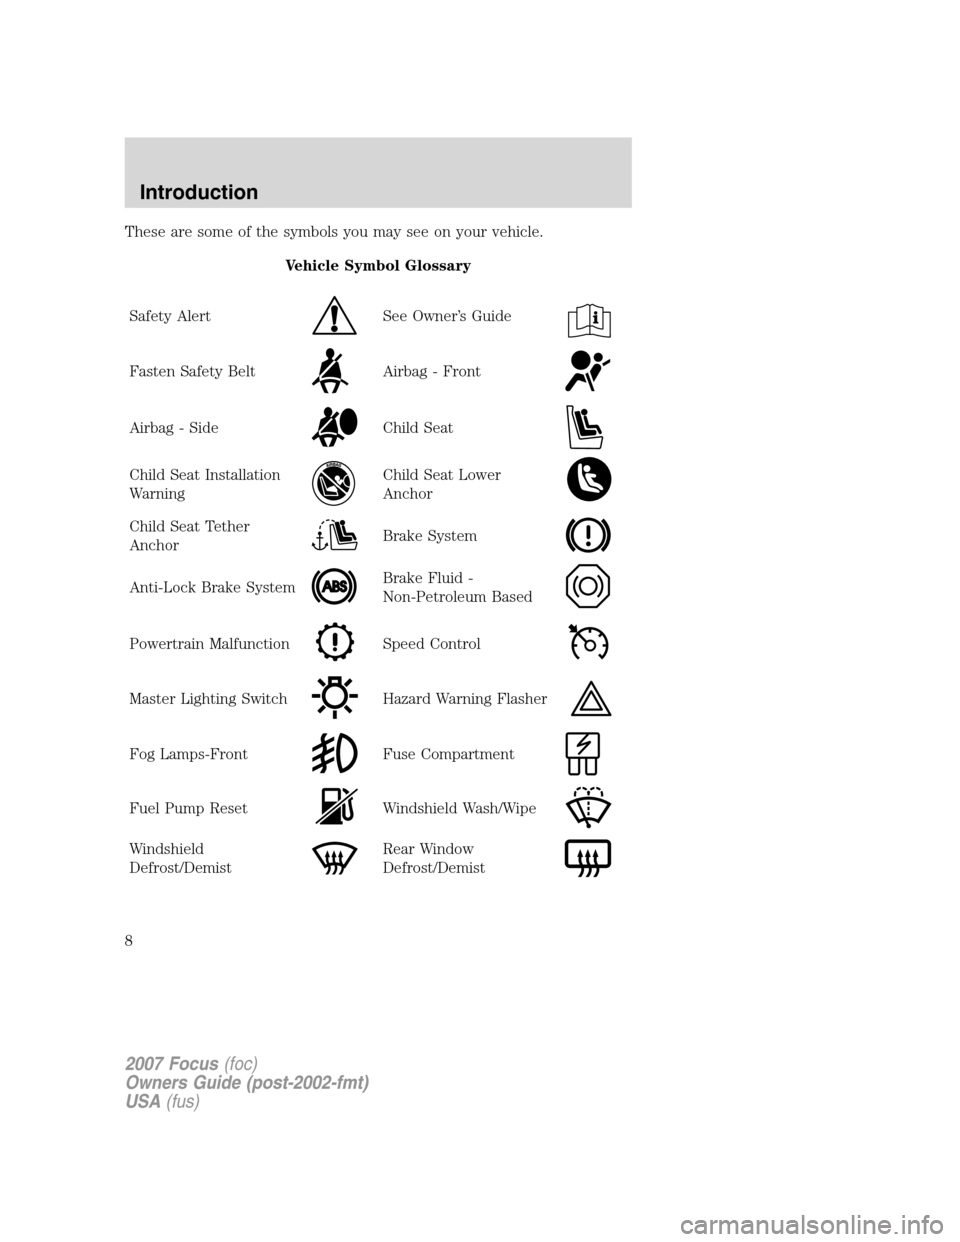 FORD FOCUS 2007 2.G Owners Manual These are some of the symbols you may see on your vehicle.
Vehicle Symbol Glossary
Safety Alert
See Owner’s Guide
Fasten Safety BeltAirbag - Front
Airbag - SideChild Seat
Child Seat Installation
War